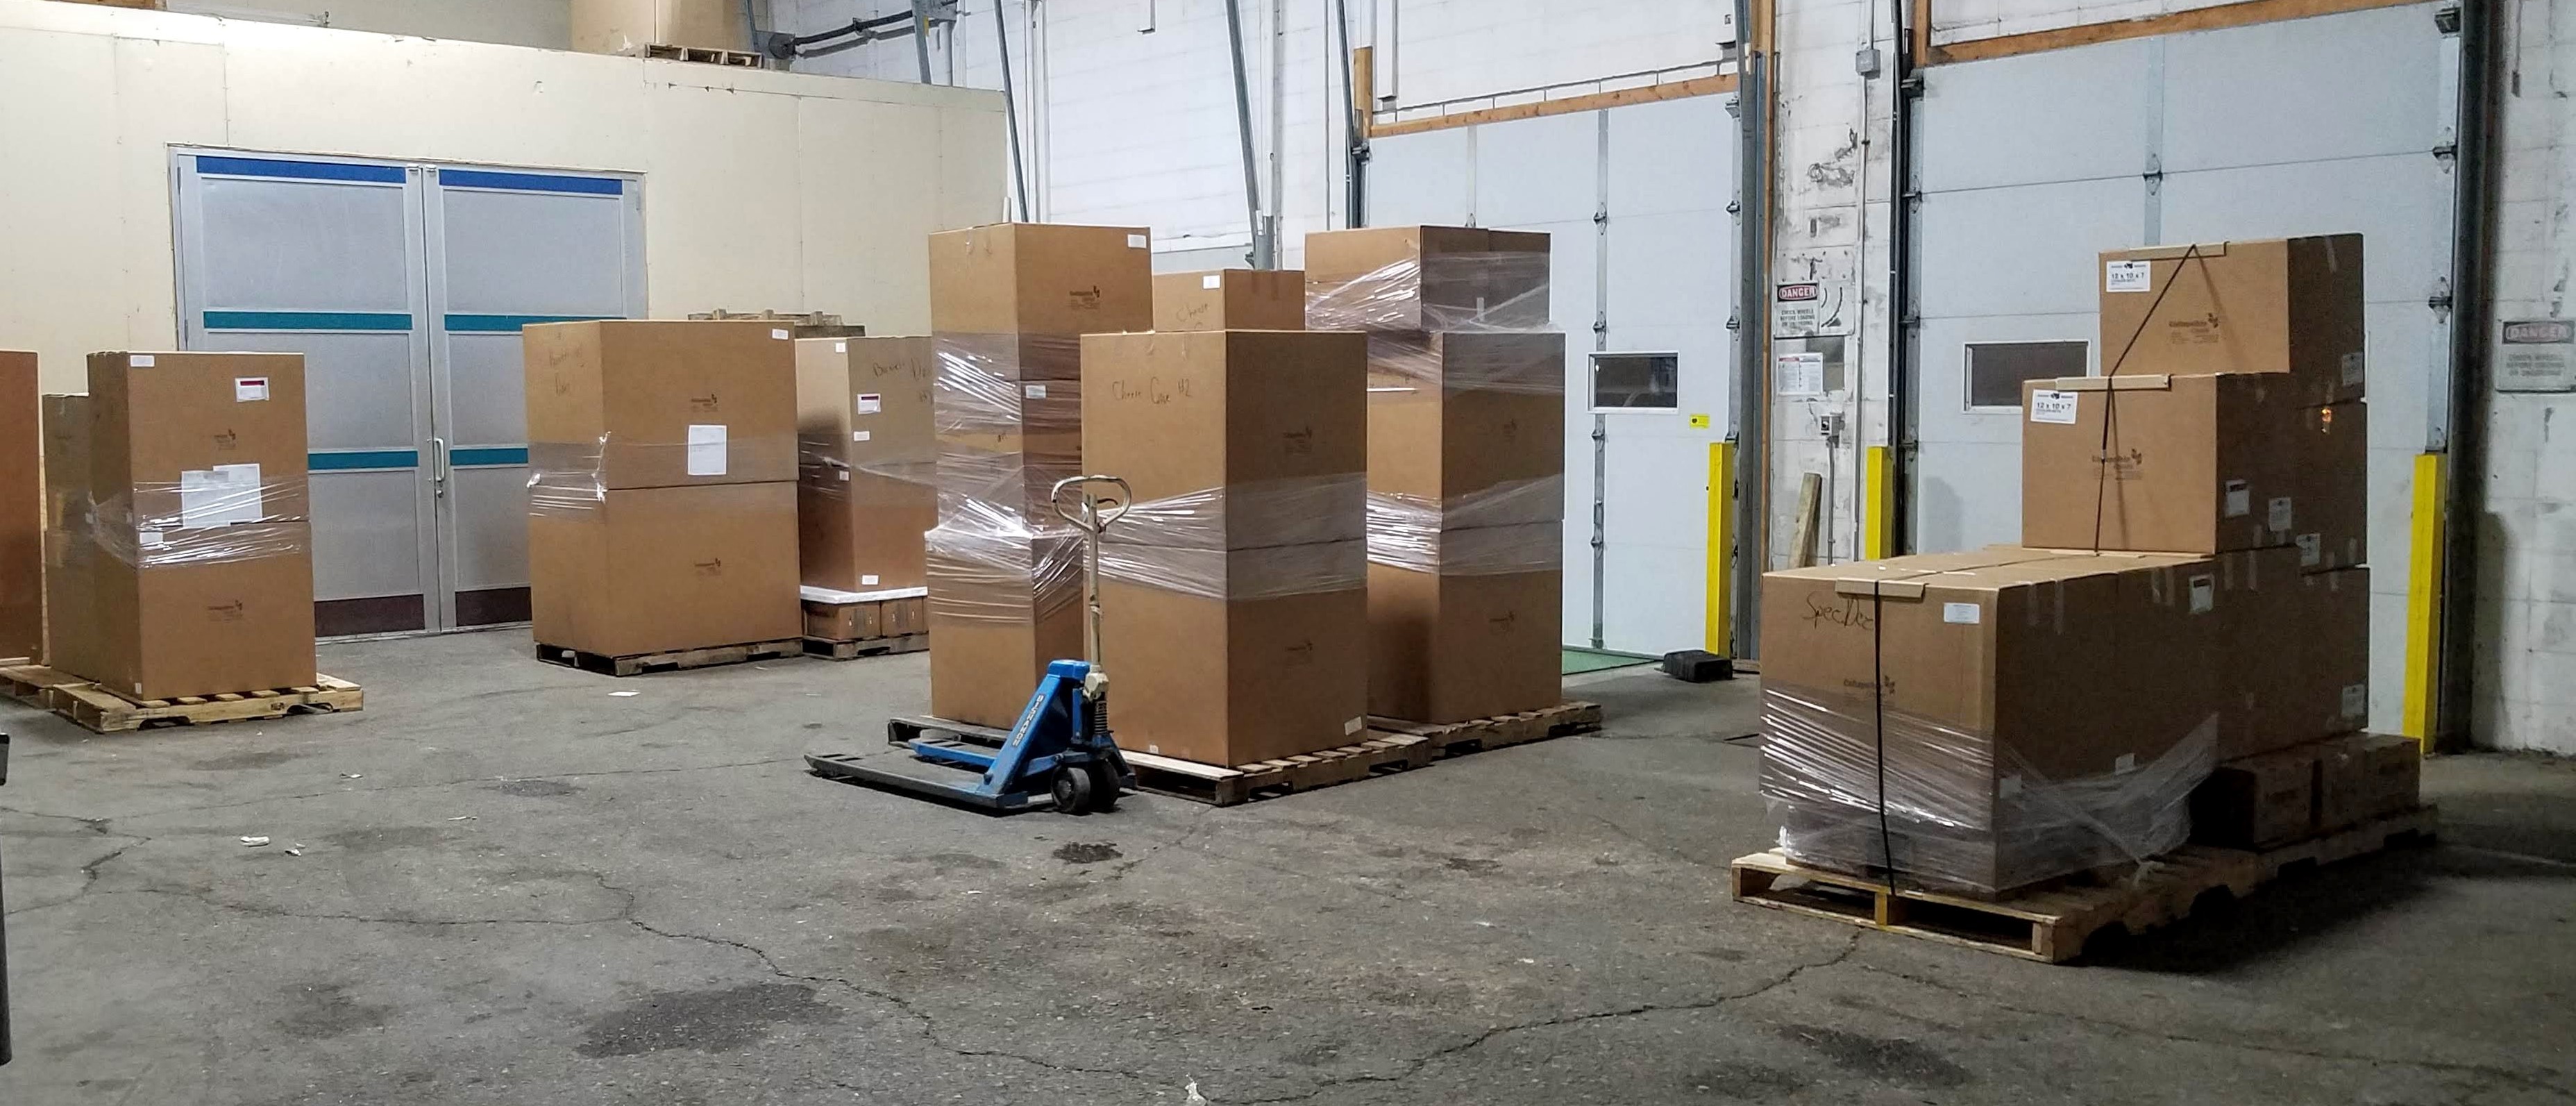 Several hundred collapsible coolers  and dozens of gel packs on nine pallets, ready for shipping to customers. Try getting that small footprint with formed coolers!